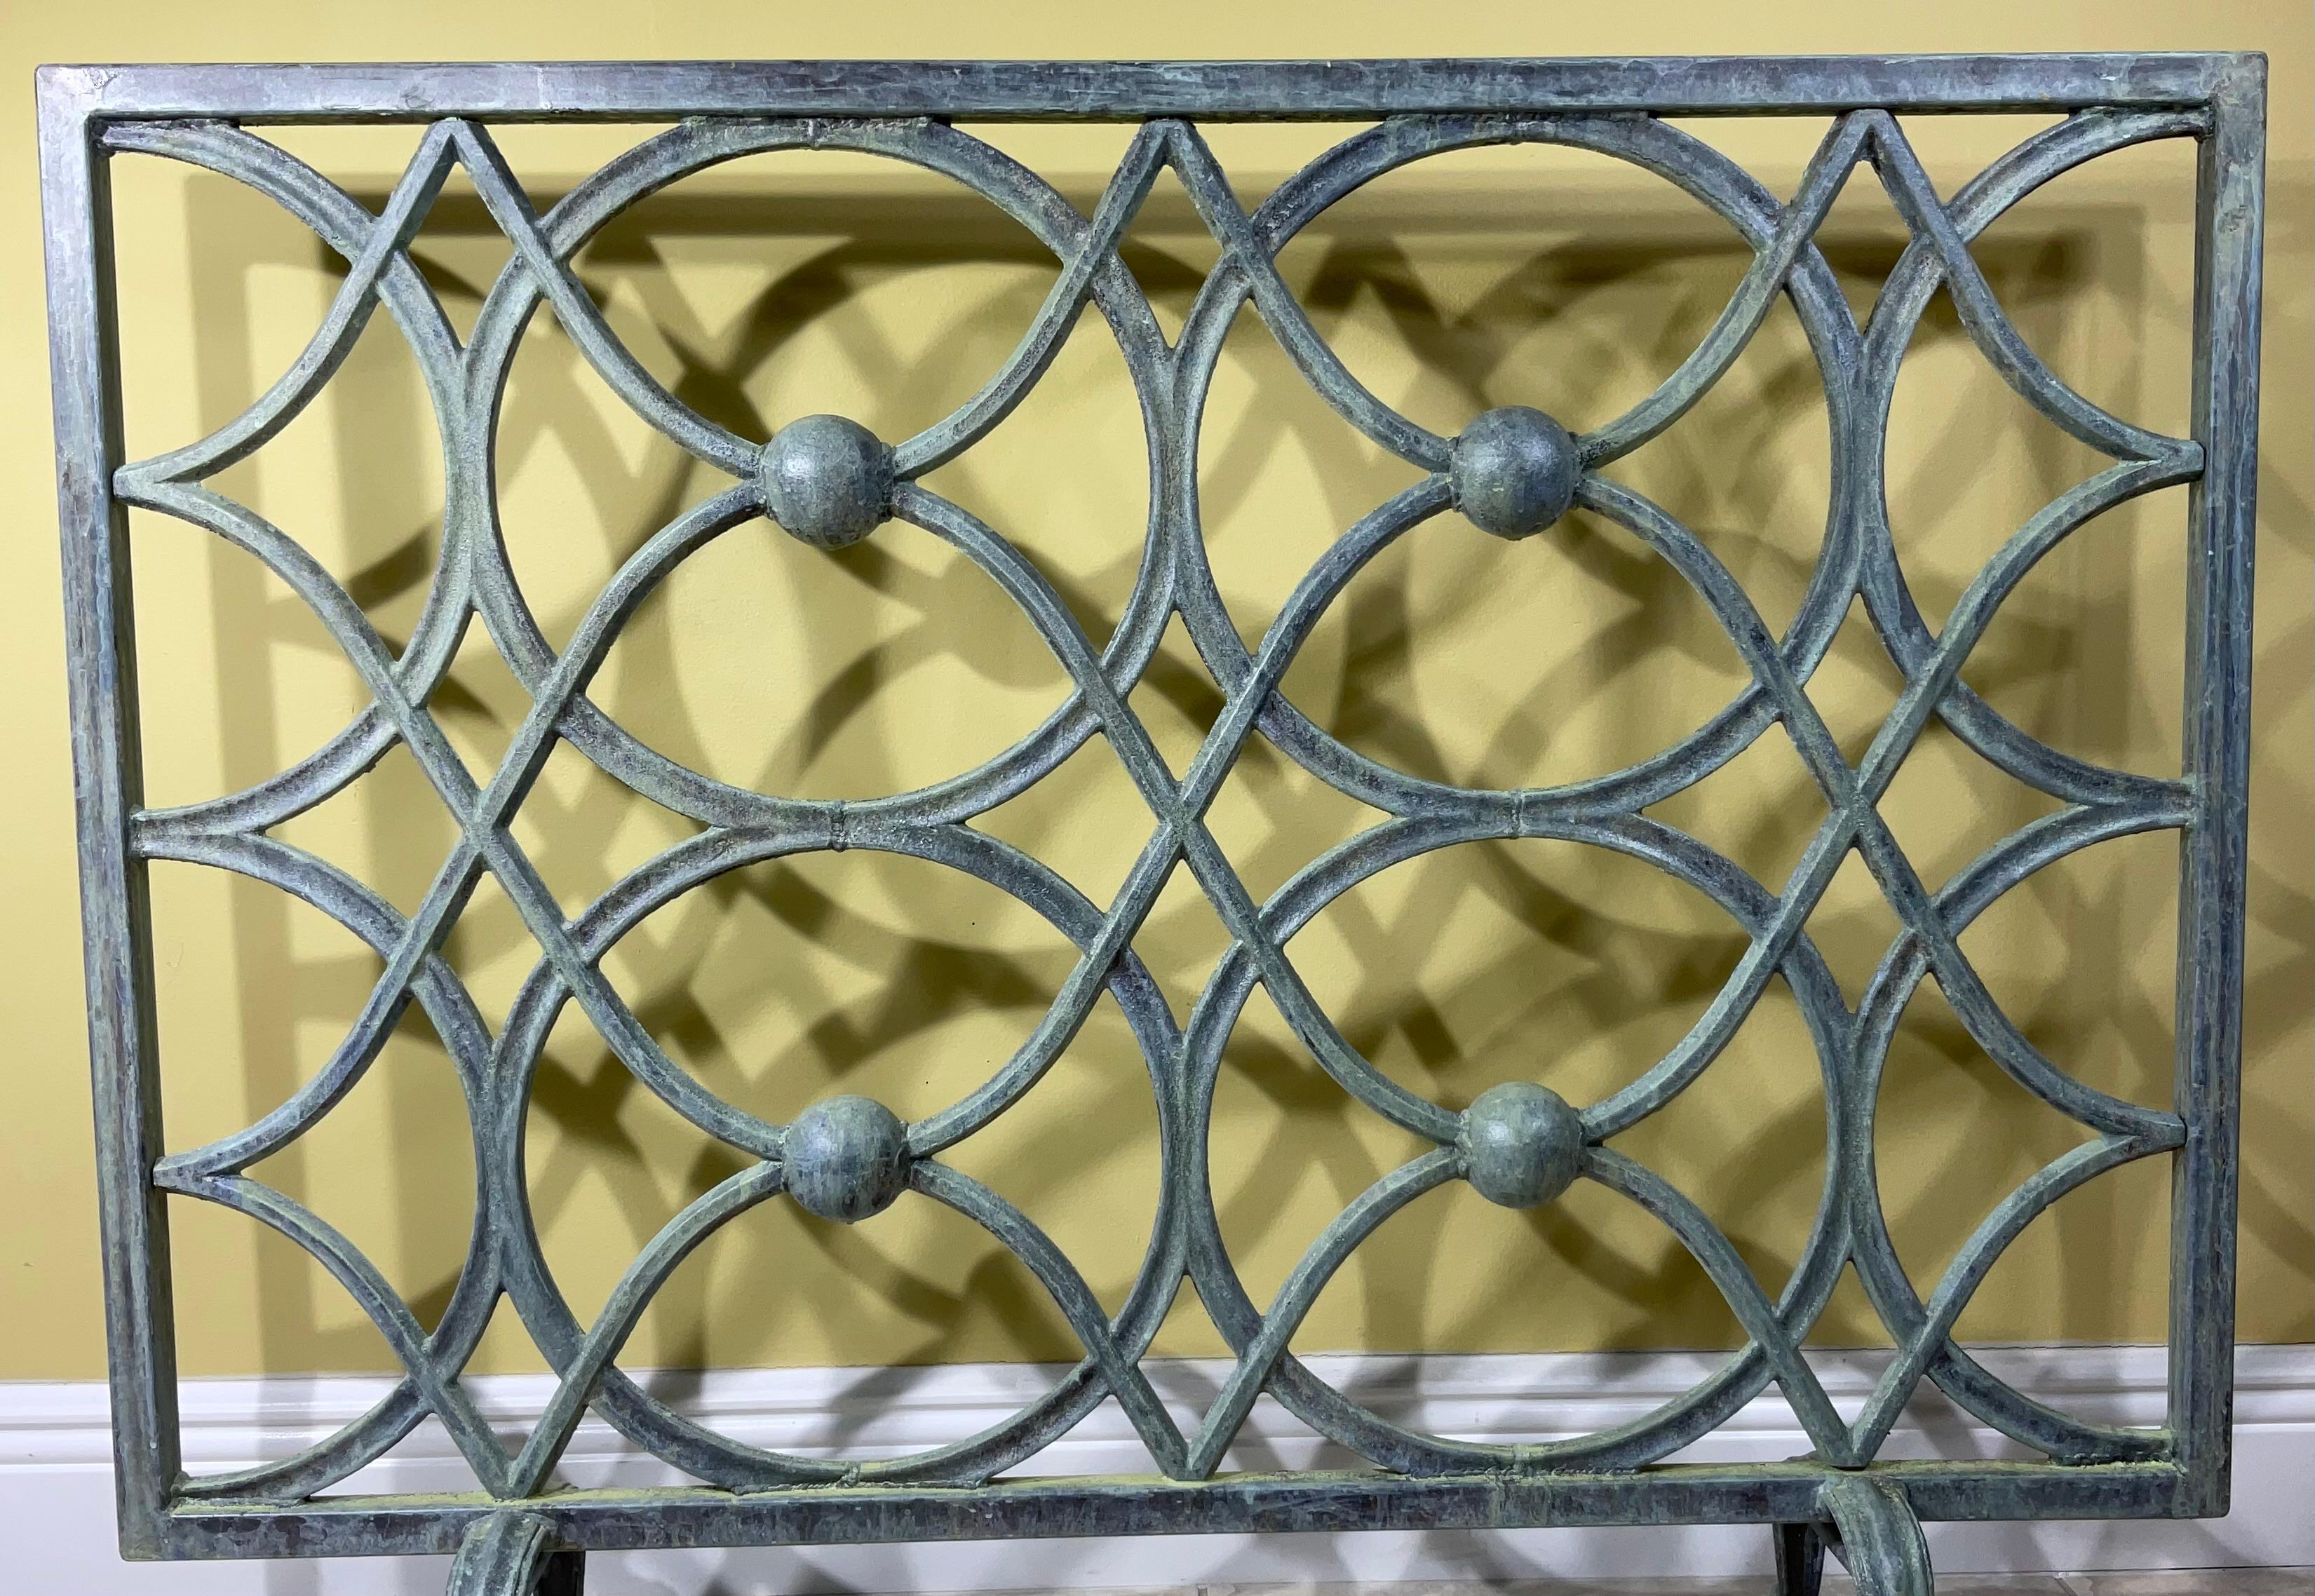 Elegant fireplace screen made of cast iron, artistic circular motif, Treated and sealed for rust.
Beautiful object of art for the fireplace.